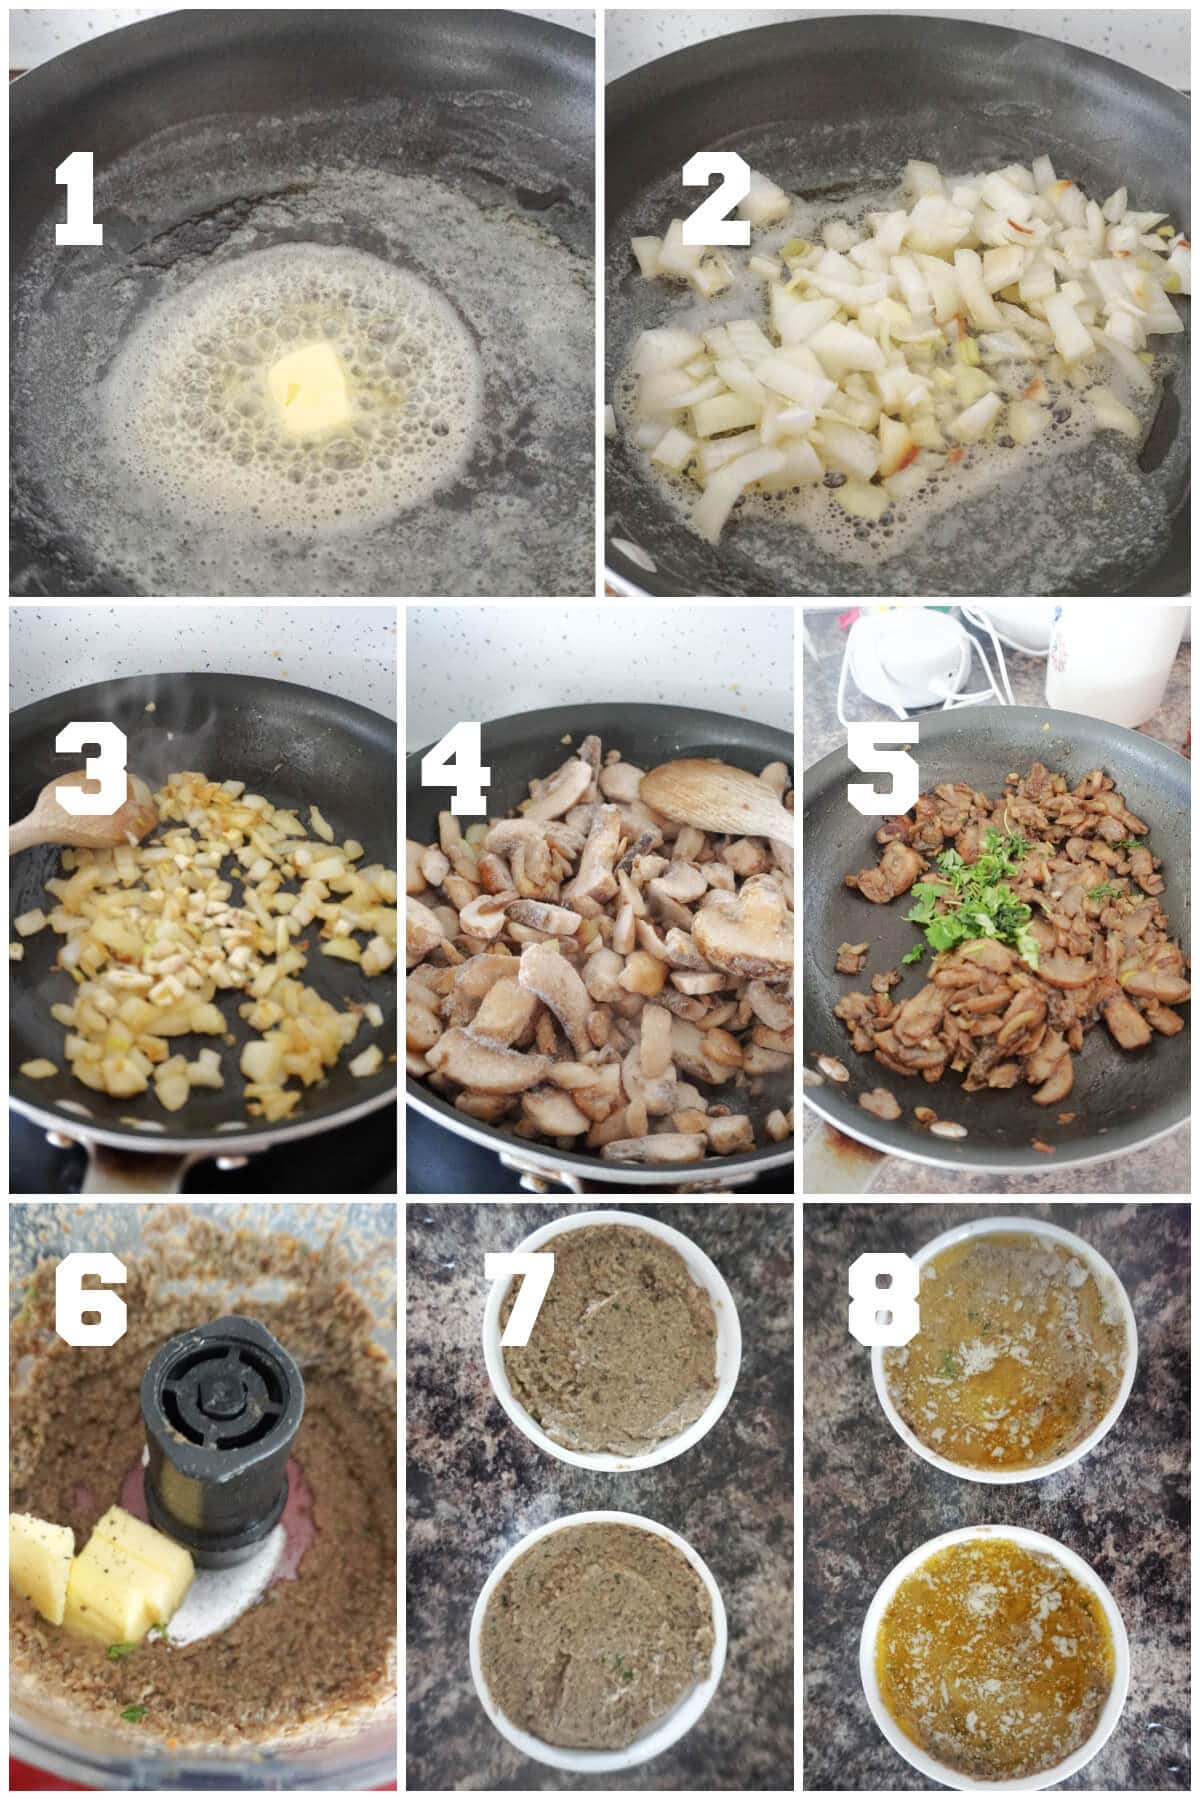 Collage of 8 photos to show how to make mushroom pate.